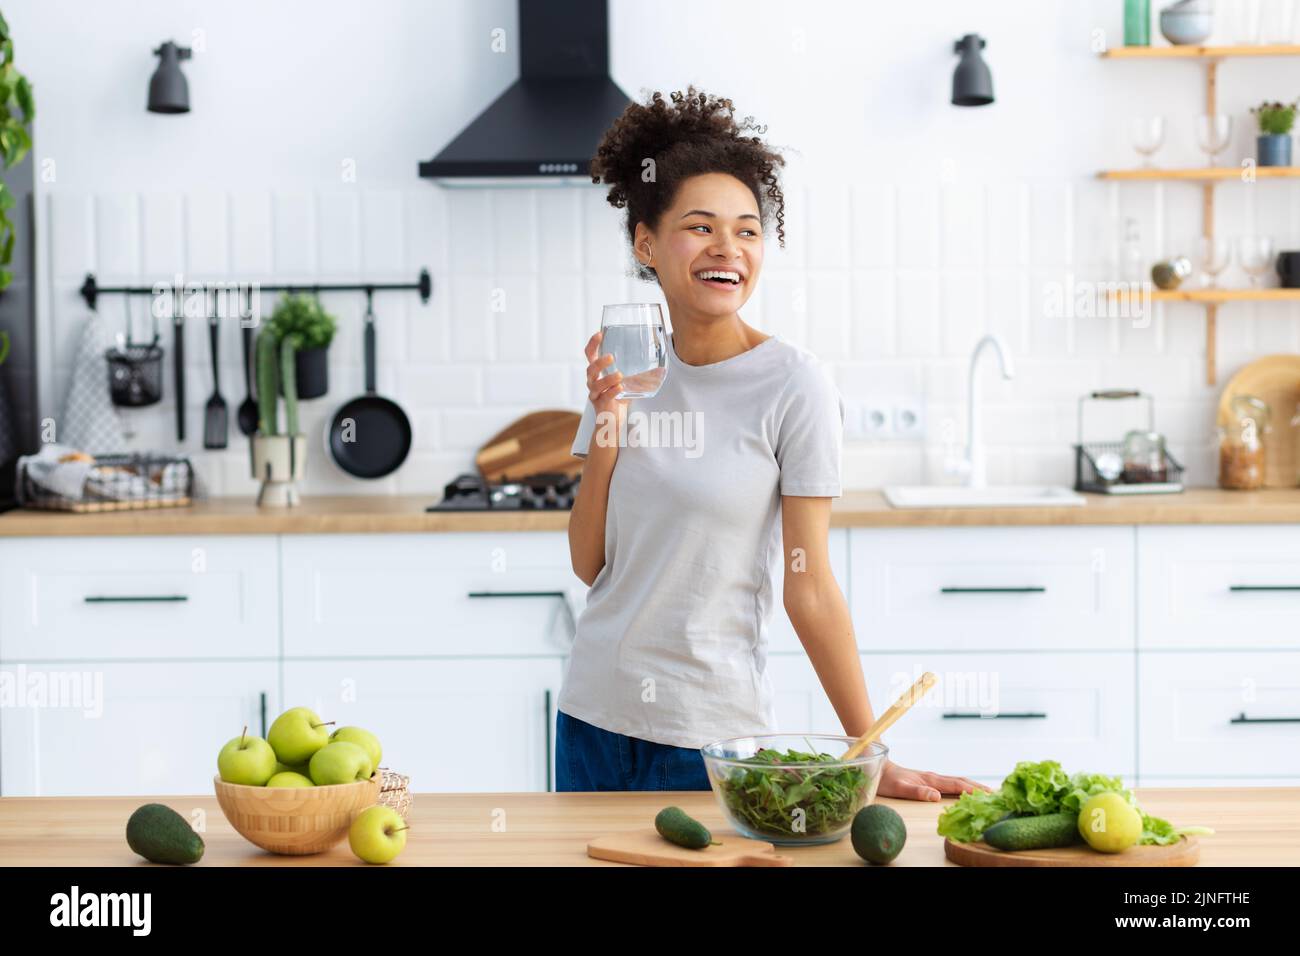 Healthy diet eating African American young female preparing salad in home kitchen Woman cooking healthy food Stock Photo